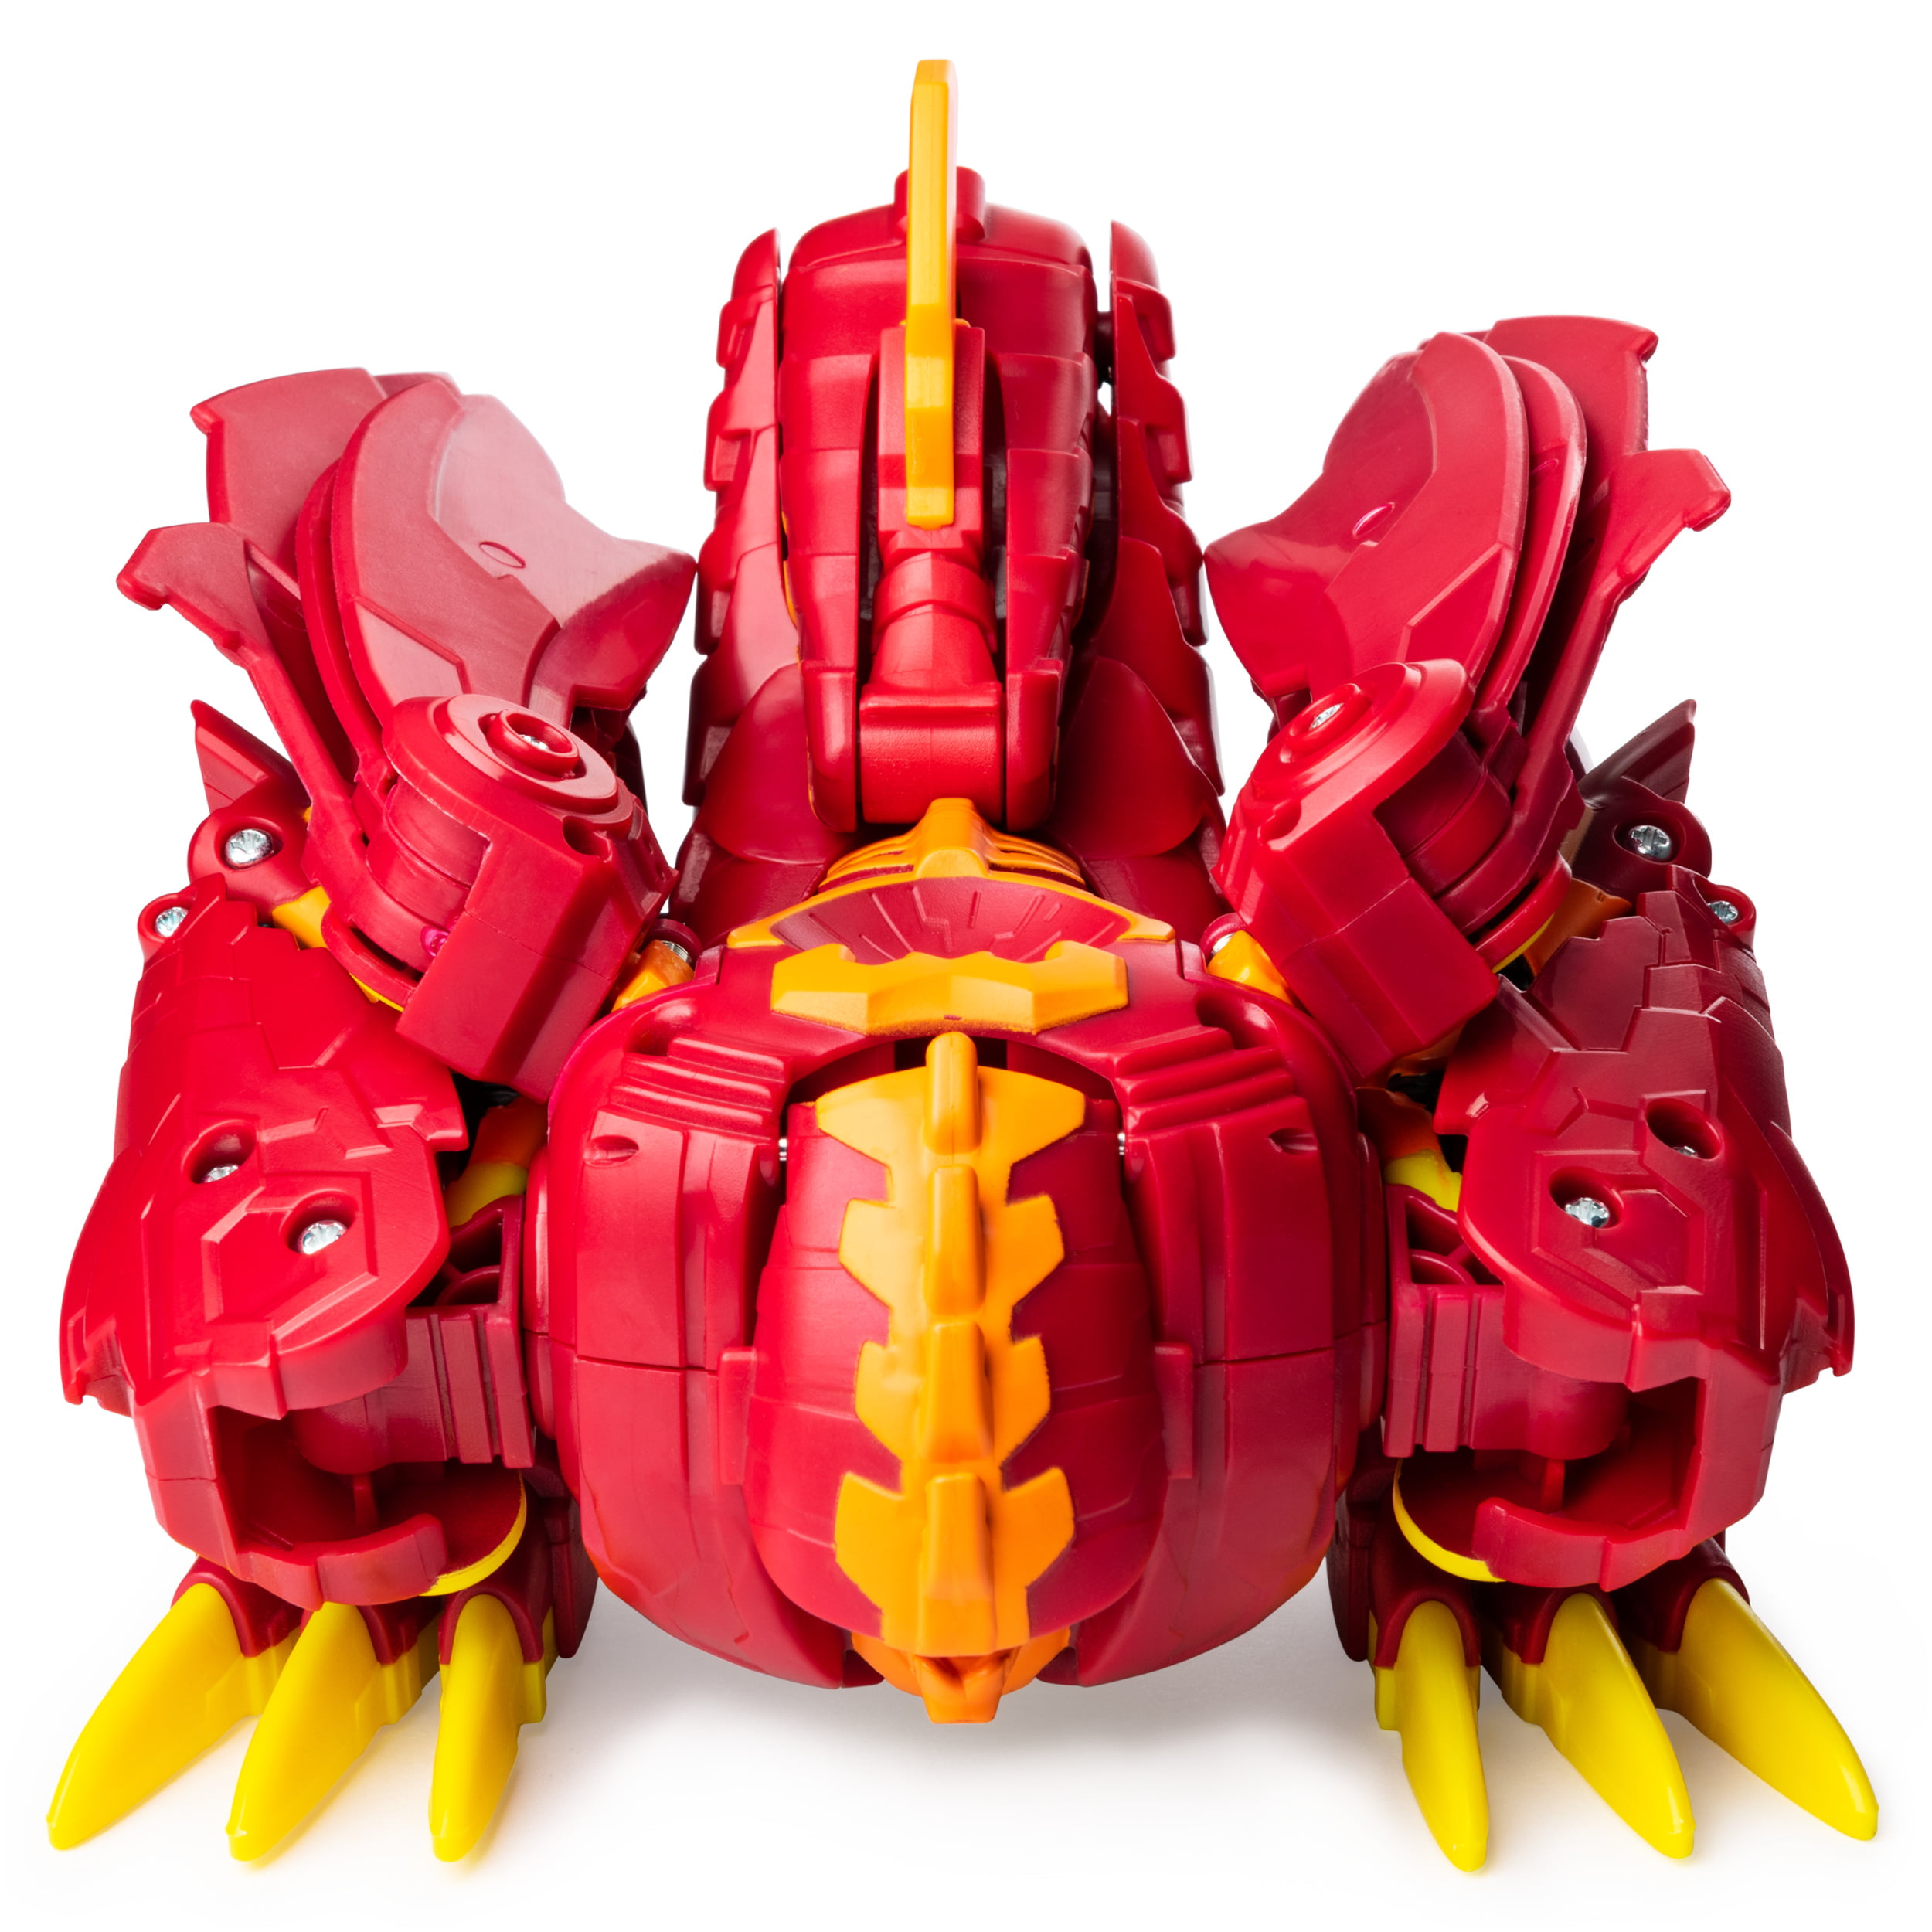 Toy Bakugan DRAGONOID MAXIMUS Transforming Figure with Lights and Sounds 